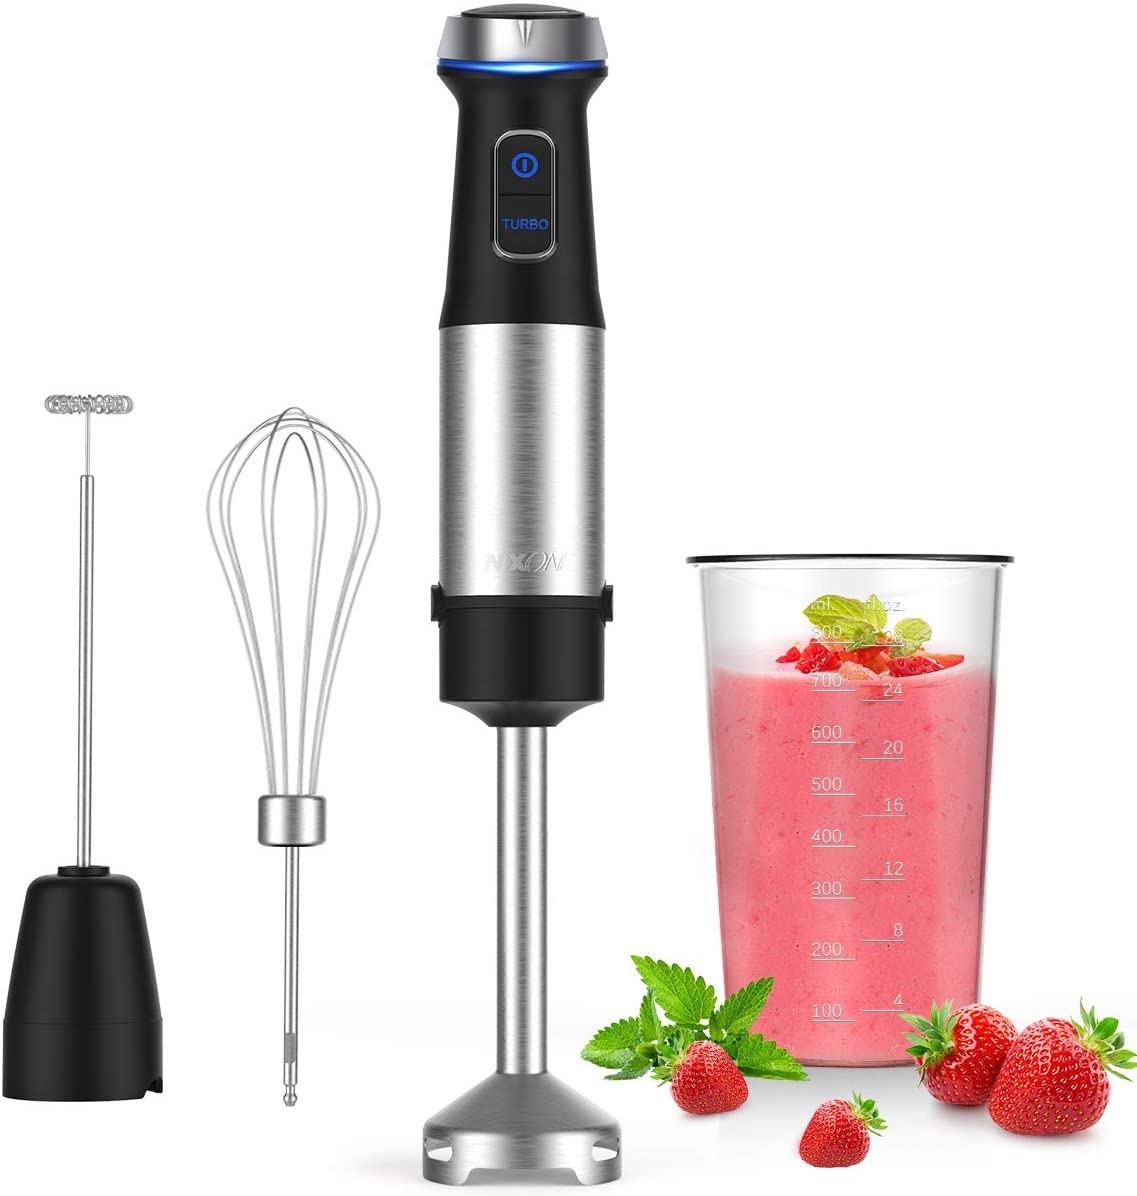 The four-in-one immersion blender with a whisk attachment, frothing attachment, and mixing beaker